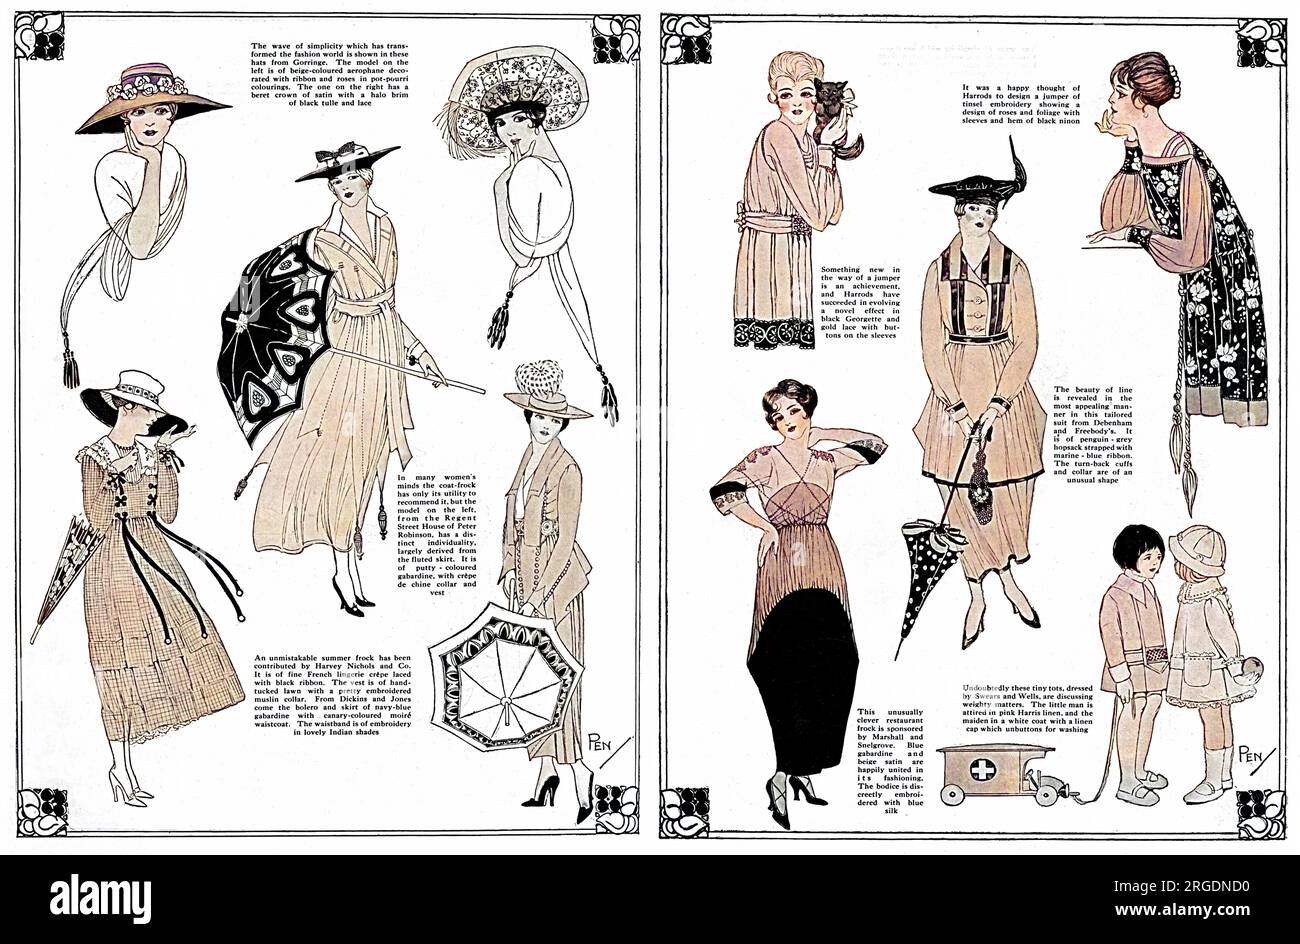 A double page spread from The Tatler giving examples of economical outfits which could be purchased in wartime.  Extravagant evening dresses are not featured but instead coat frocks, summer frocks and tailored suits predominate from retailers such as Harrods, Debenham & Freebody, Marshall & Snelgrove, Swears & Wells, Harvey Nichols, Peter Robinson and Gorringe.  Note the children playing with a toy Red Cross ambulance. Stock Photo